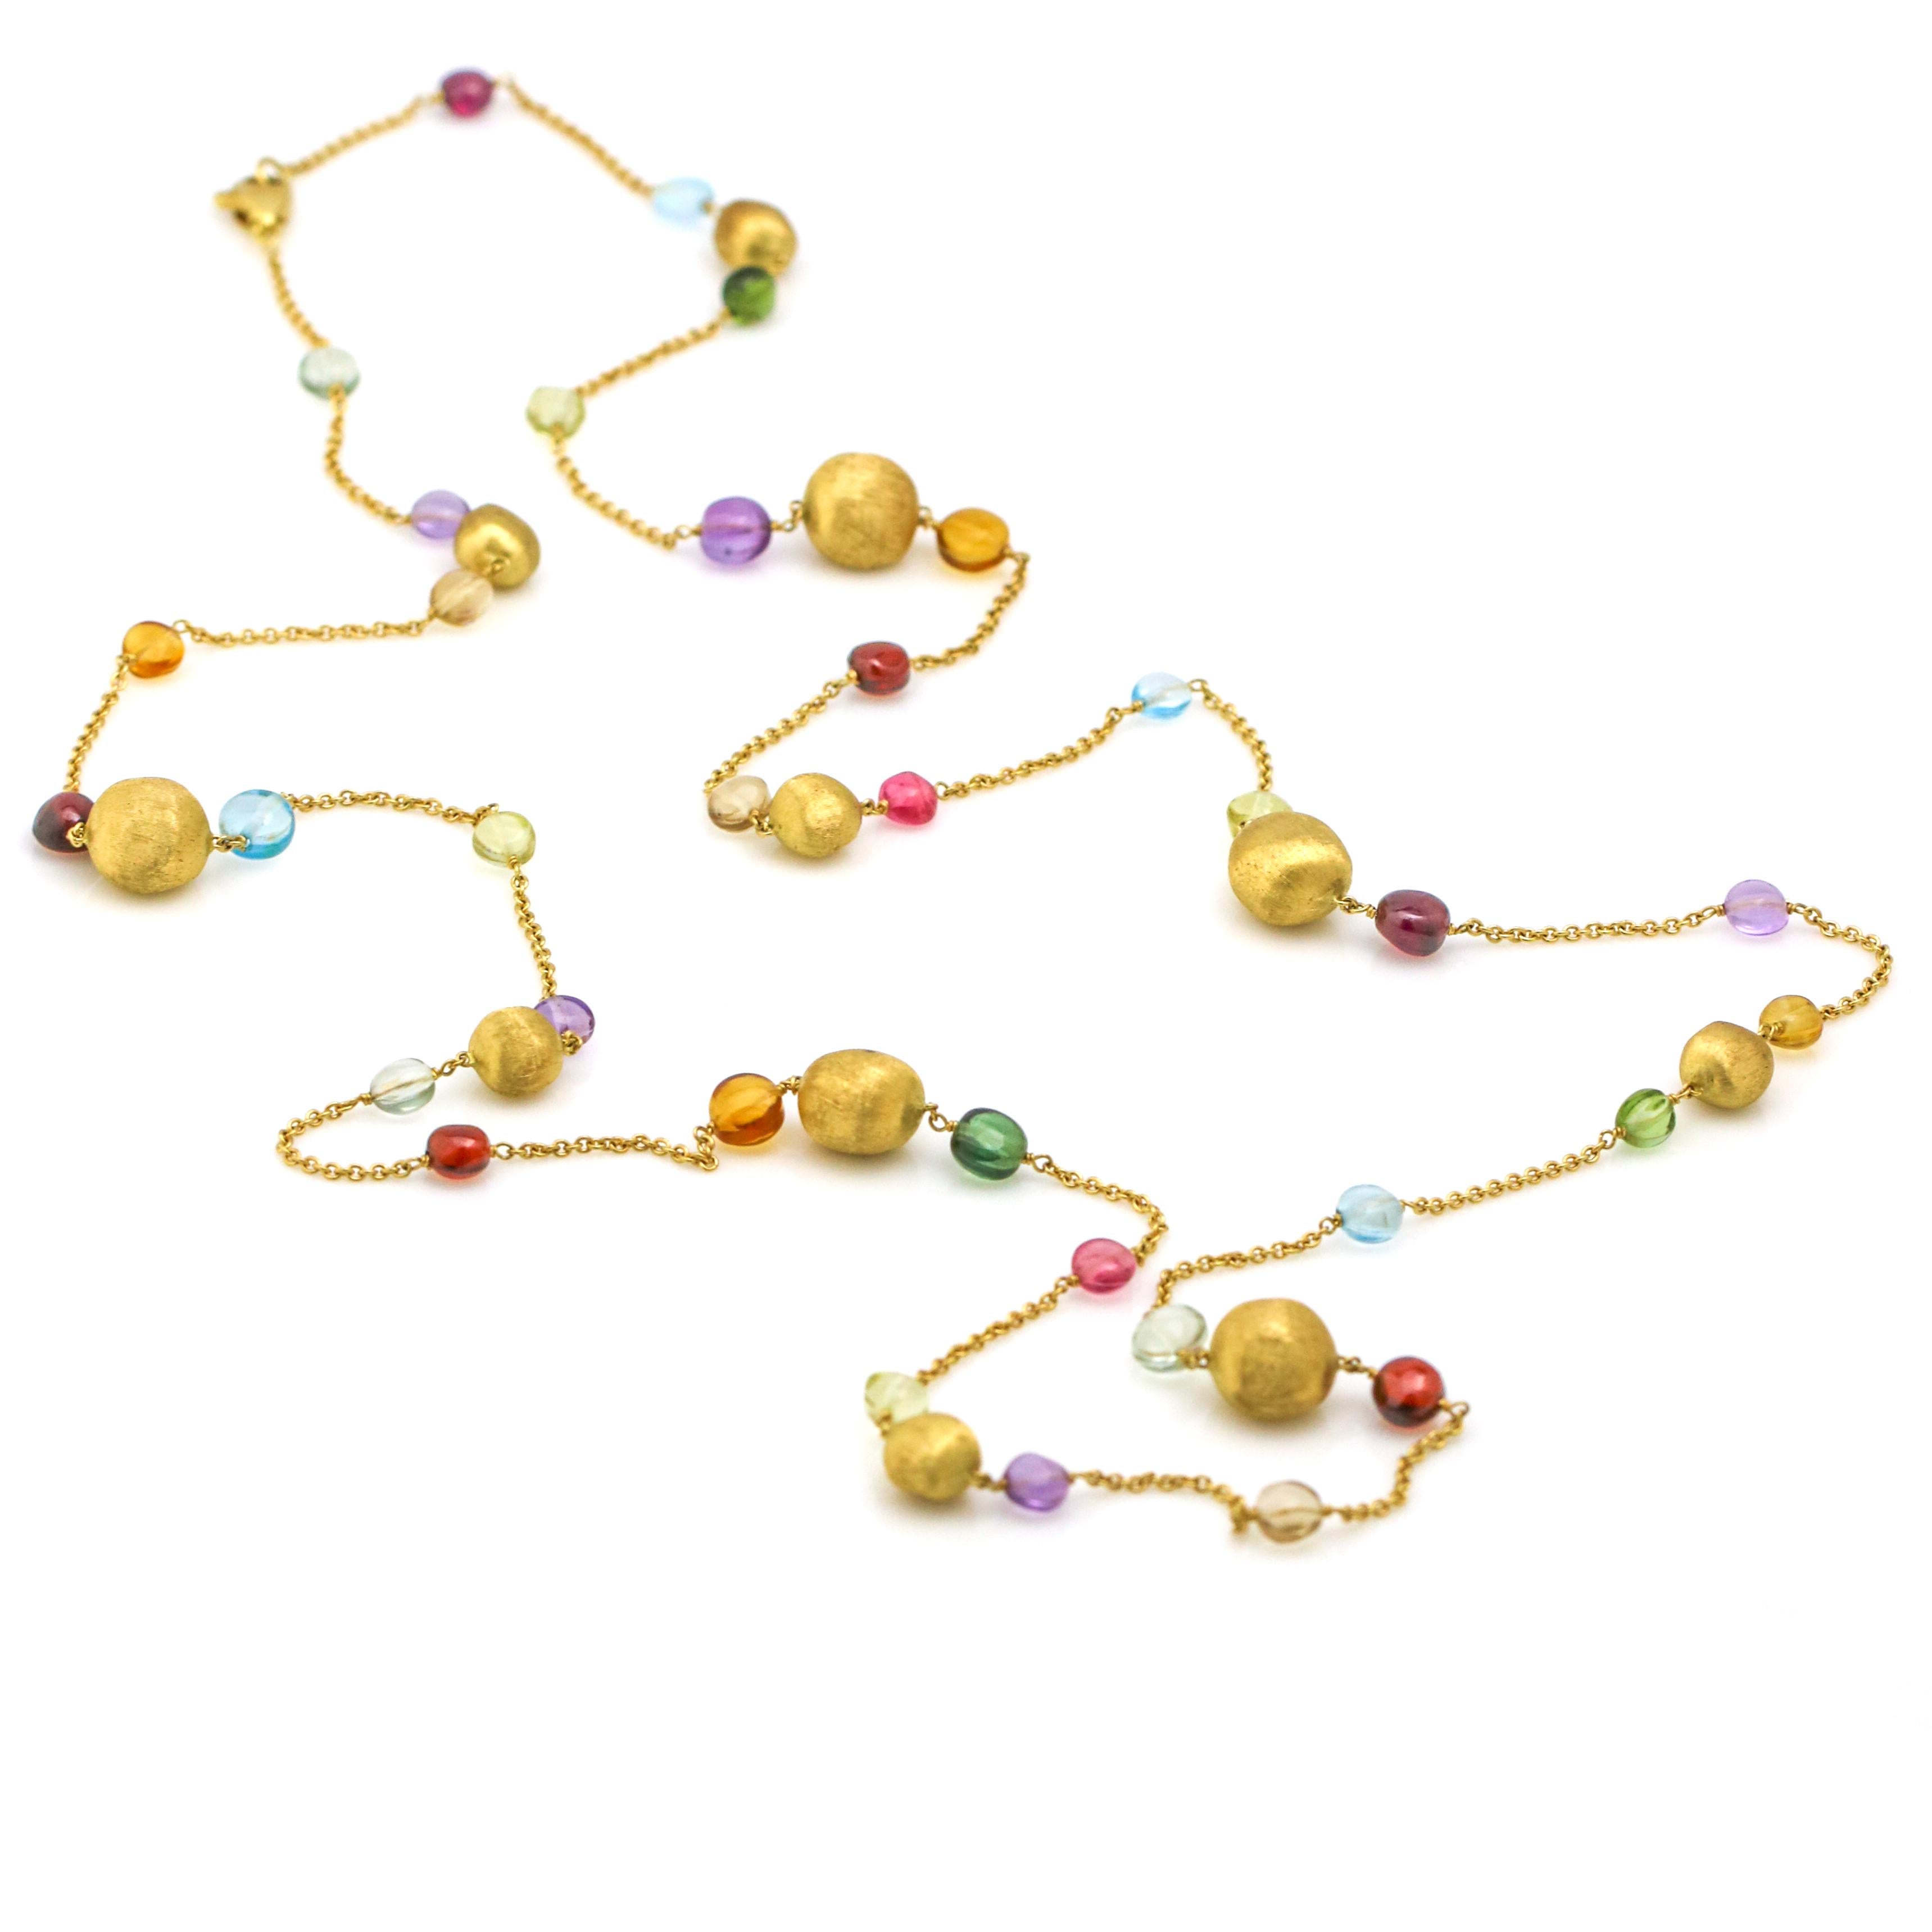 Marco Bicego Africa mixed gemstones and gold beads necklace in 18 karat gold. Lobster clasp.

Length, 36 inches.
Gold Beads, 10 mm - 7 mm.
Weight, 20.6 grams.

Previously owned, in excellent condition. Original box or pouch is not included. All